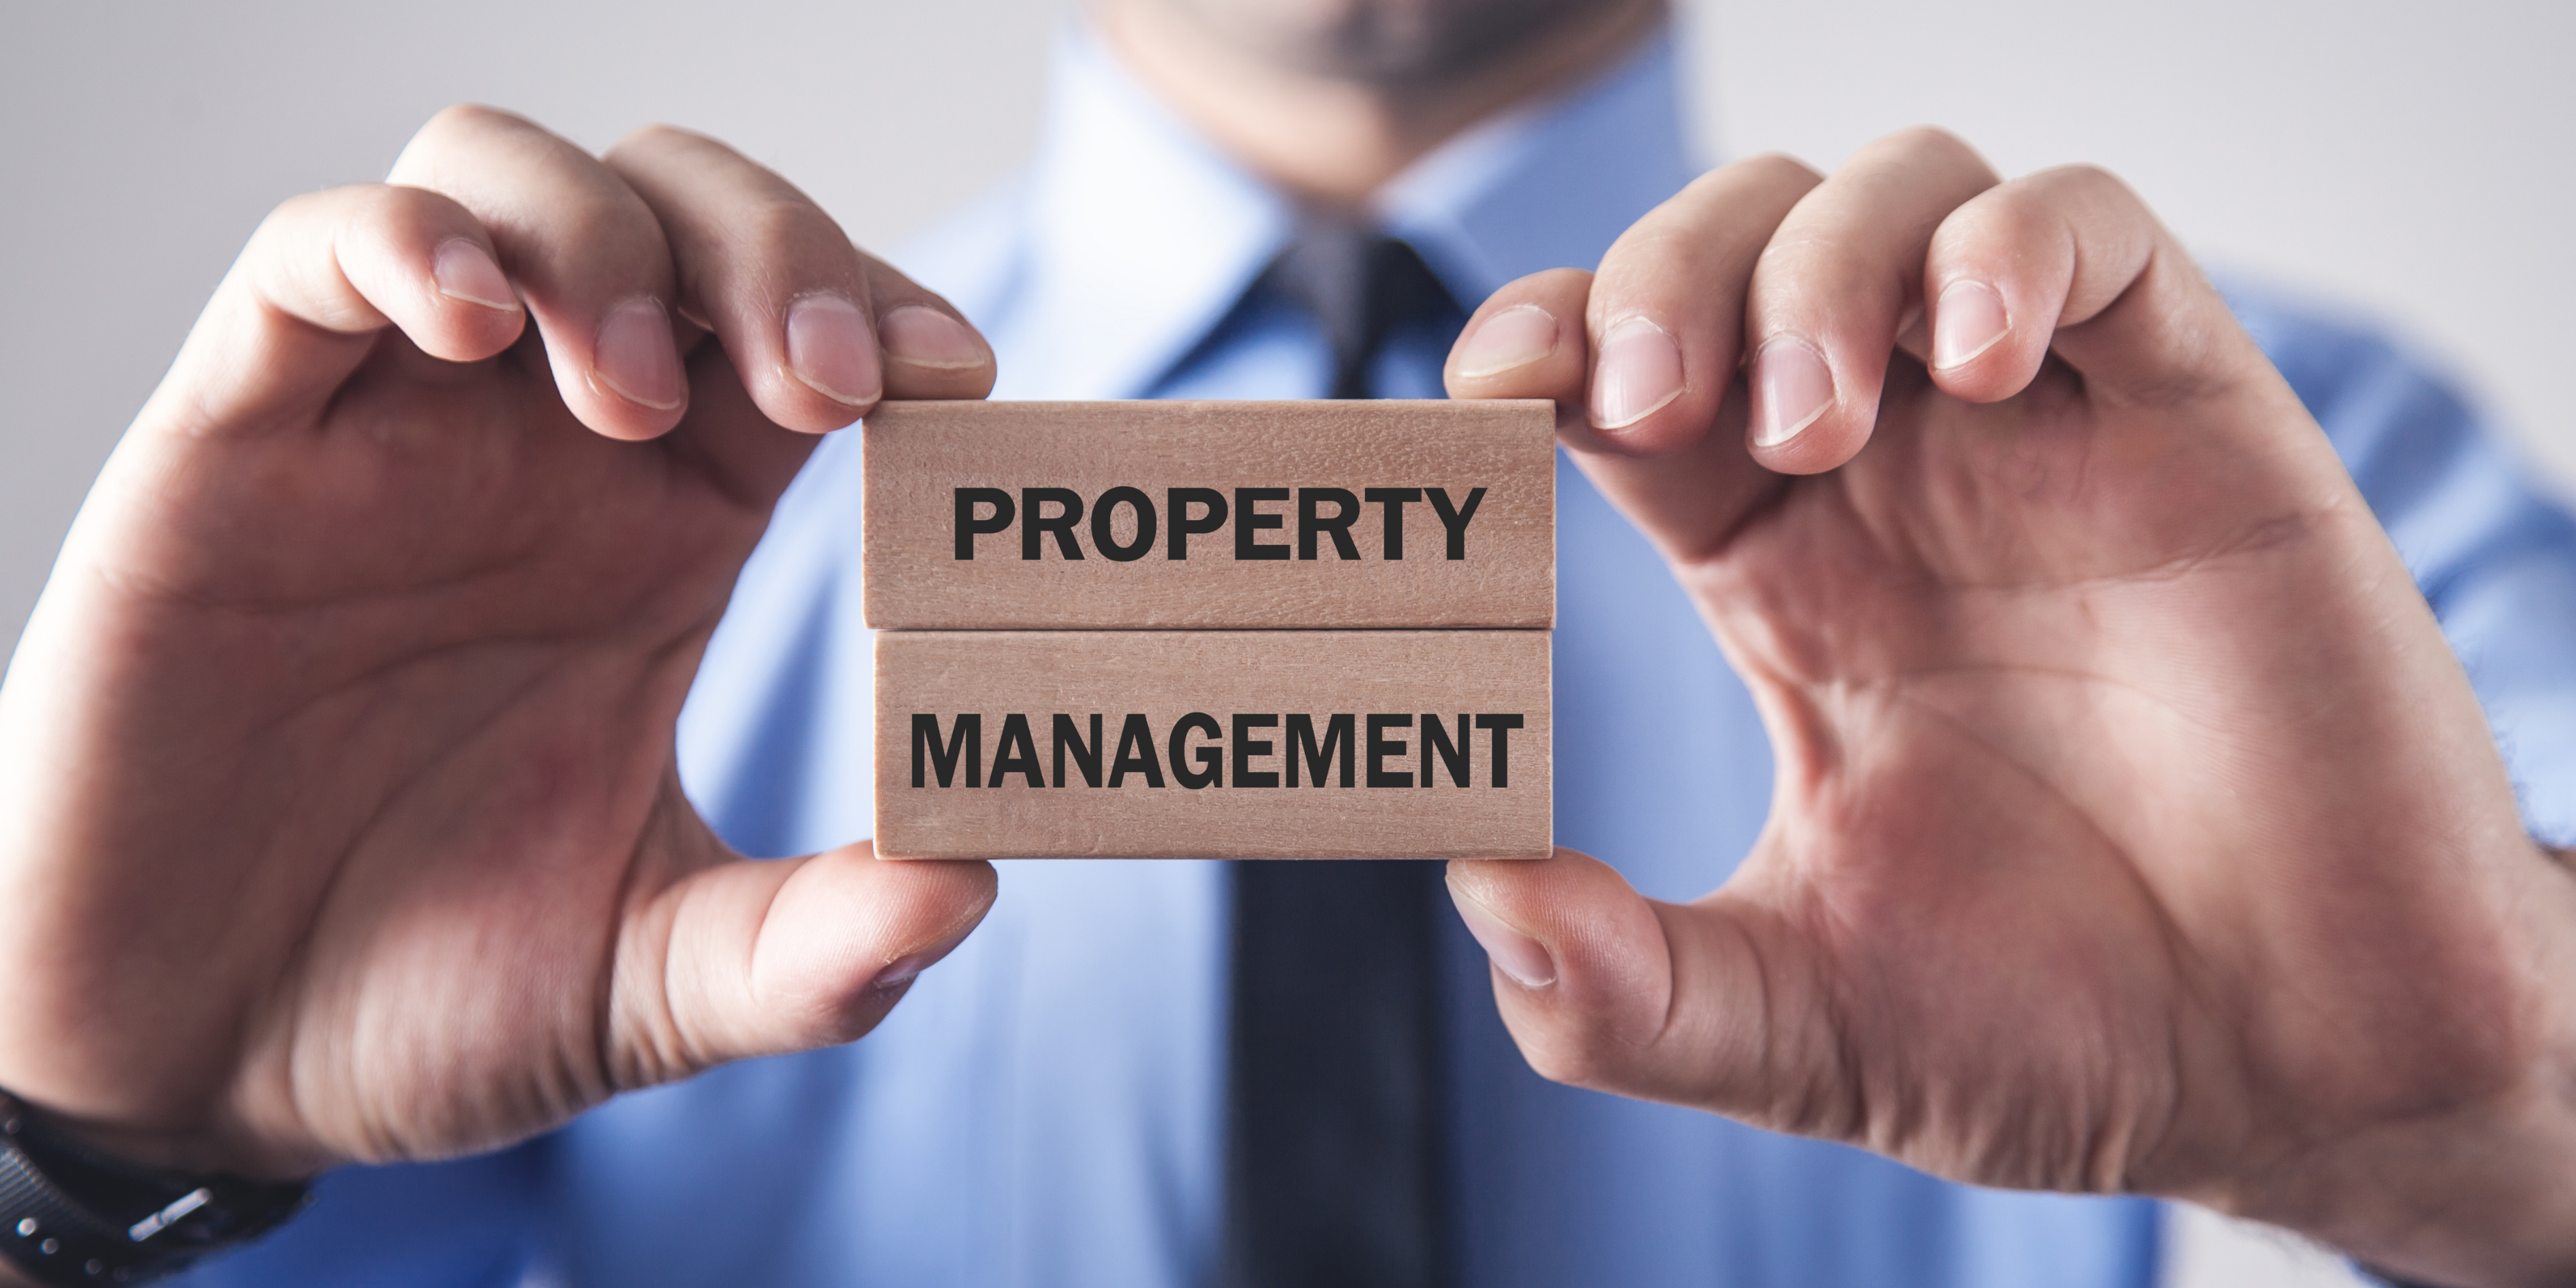 How to choose the best Property Manager for you